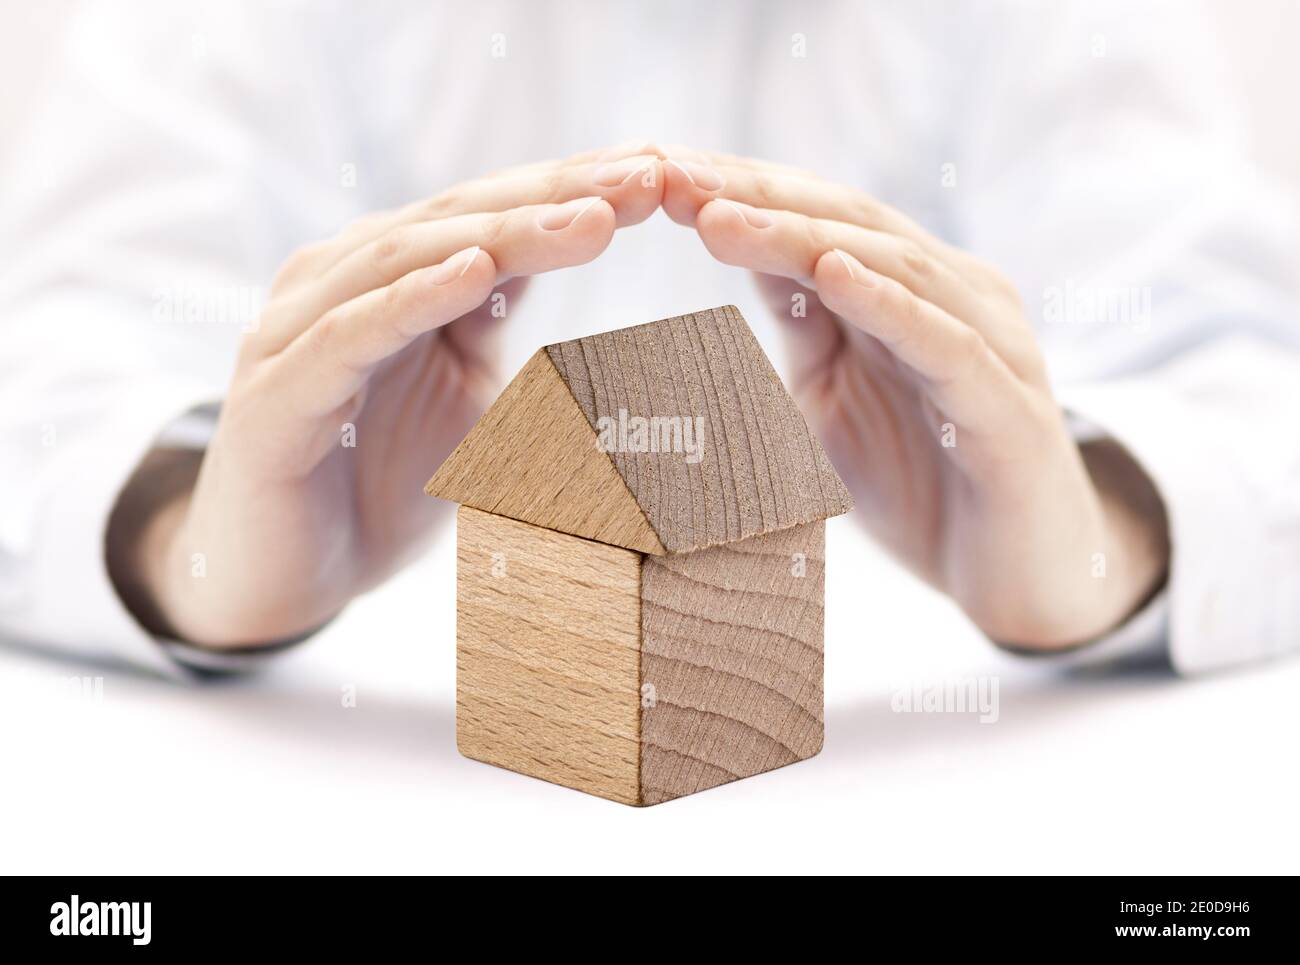 Small wooden house protected by hands. Home insurance concept Stock Photo